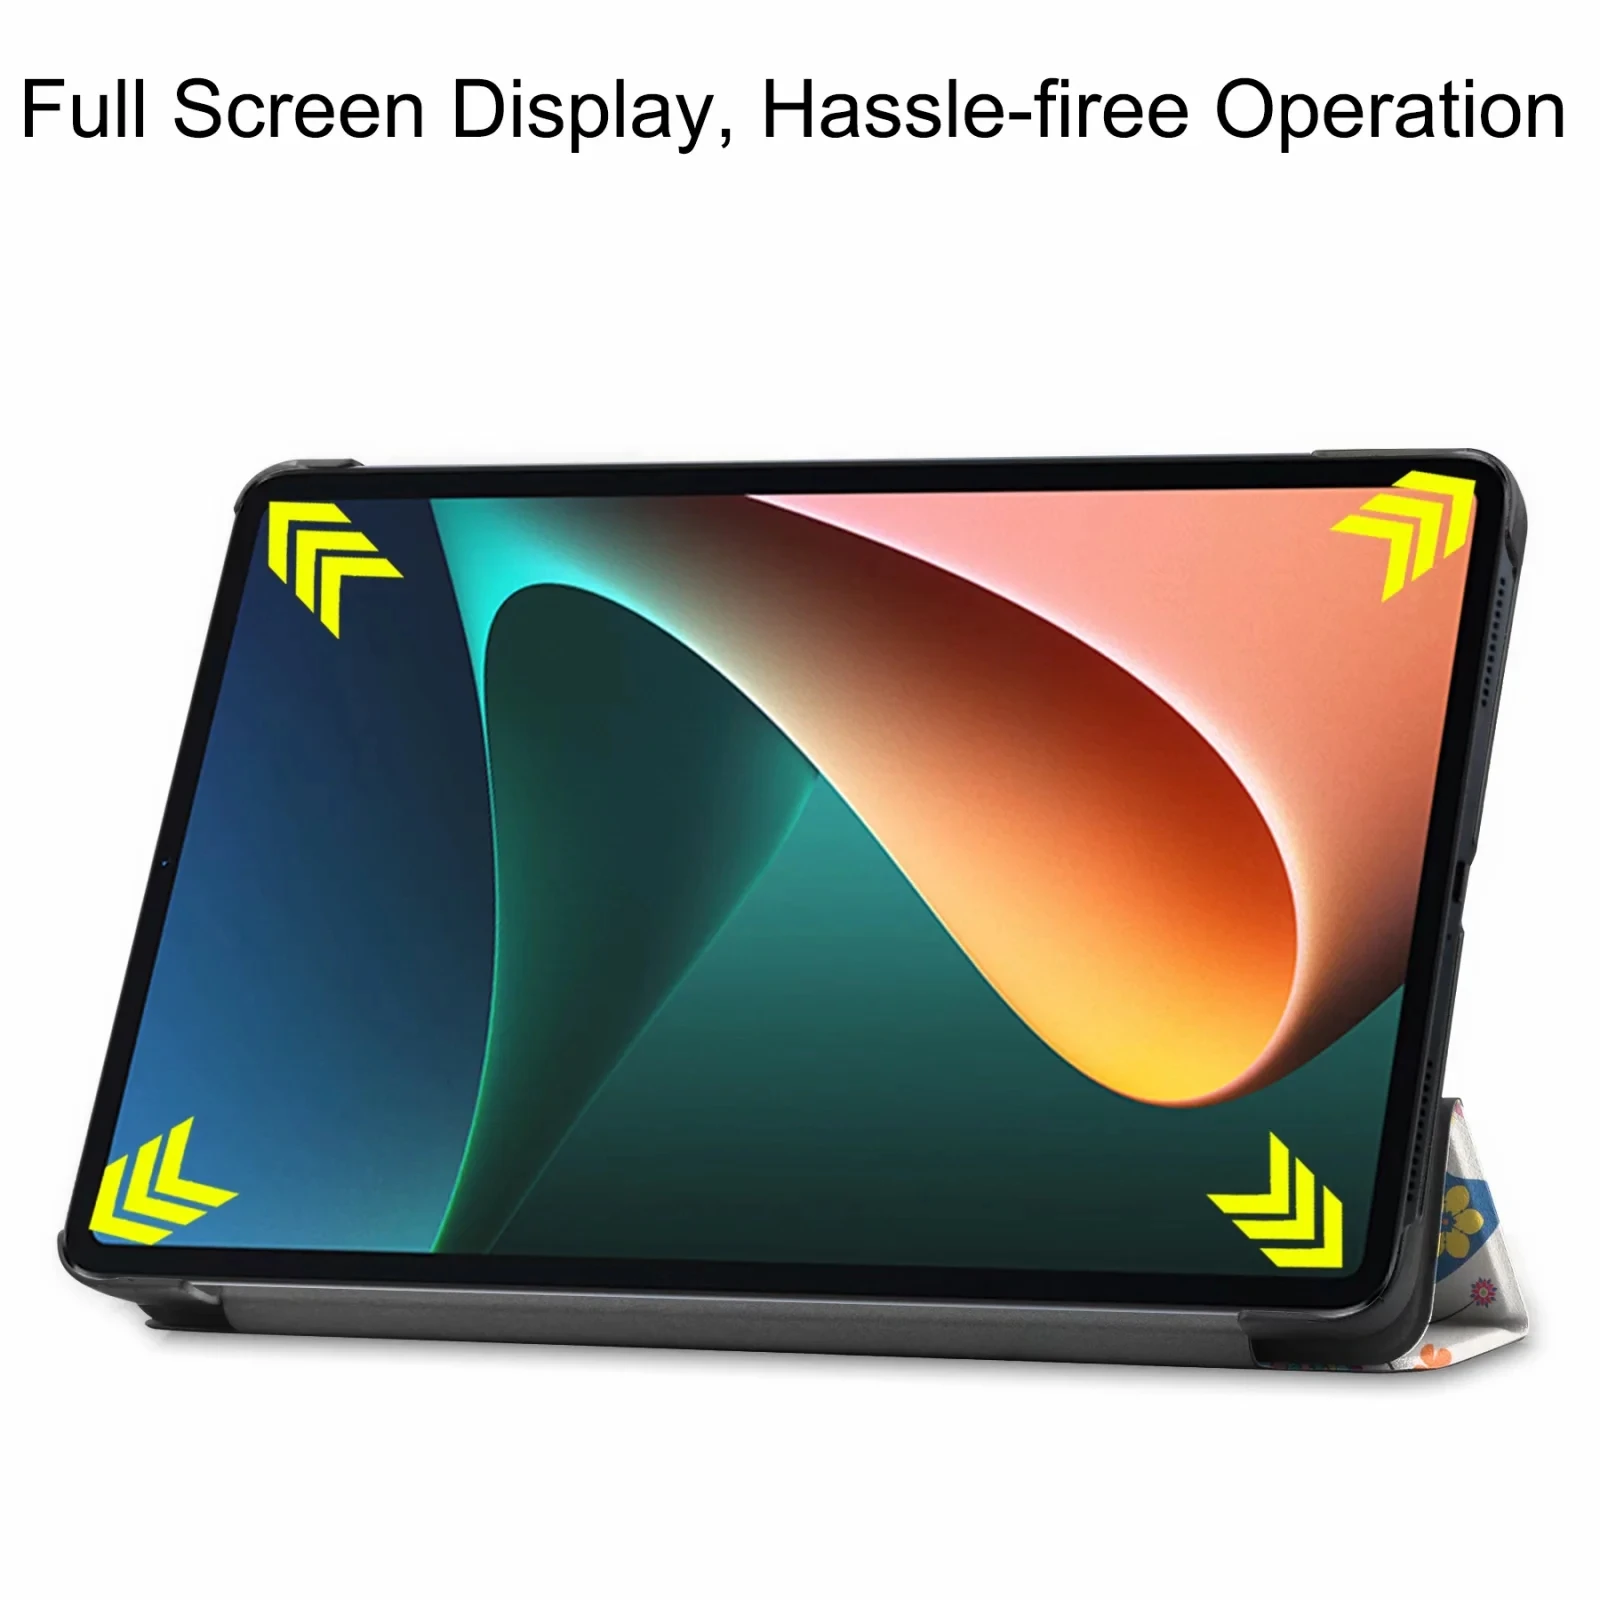 11 tri fold auto sleepwake magnetic protective case for xiaomi mipad 5 mipad5 pro tablet pc add screen protector and 3 gifts free global shipping